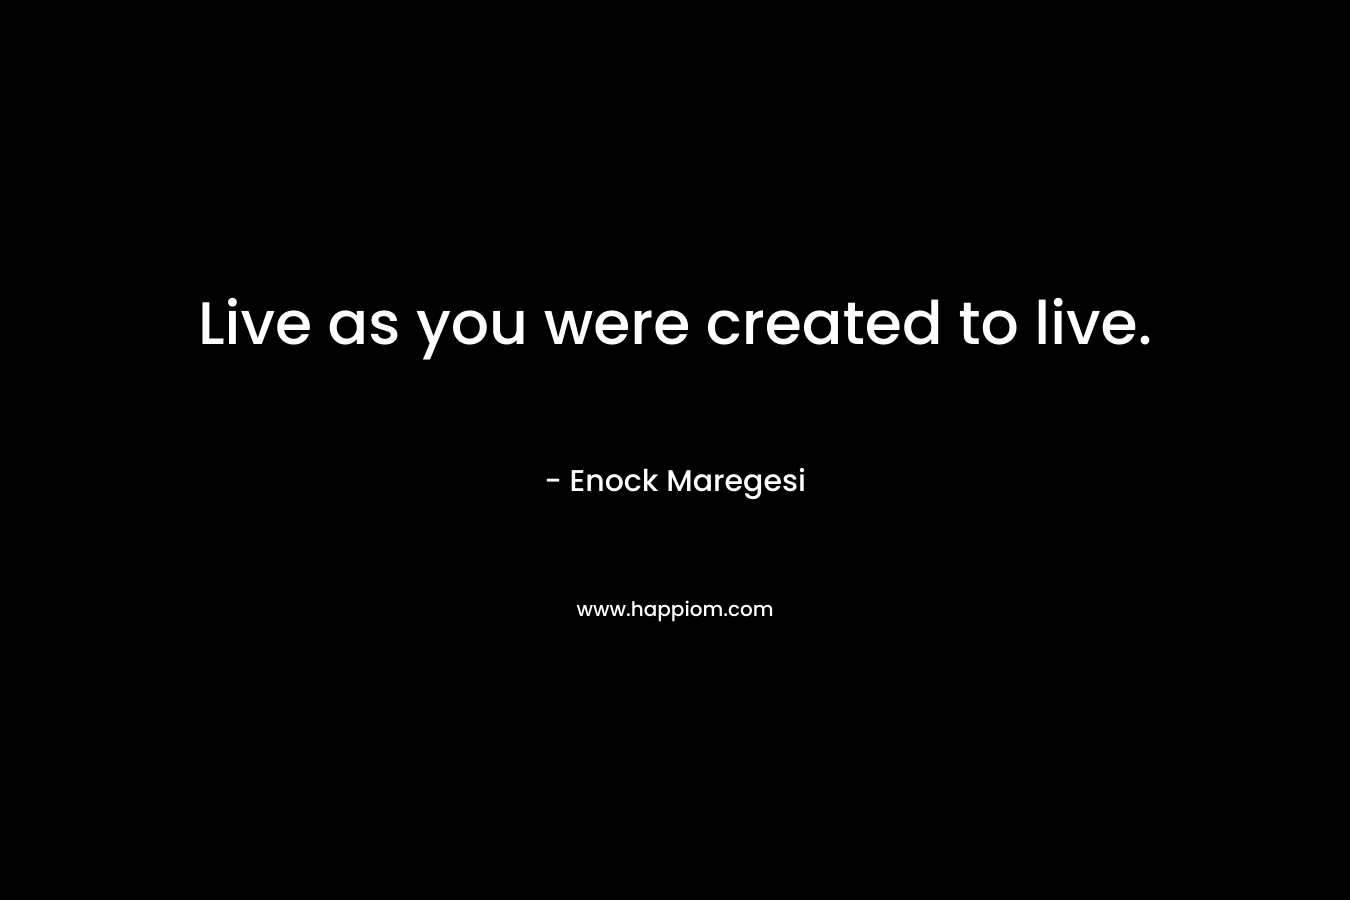 Live as you were created to live.